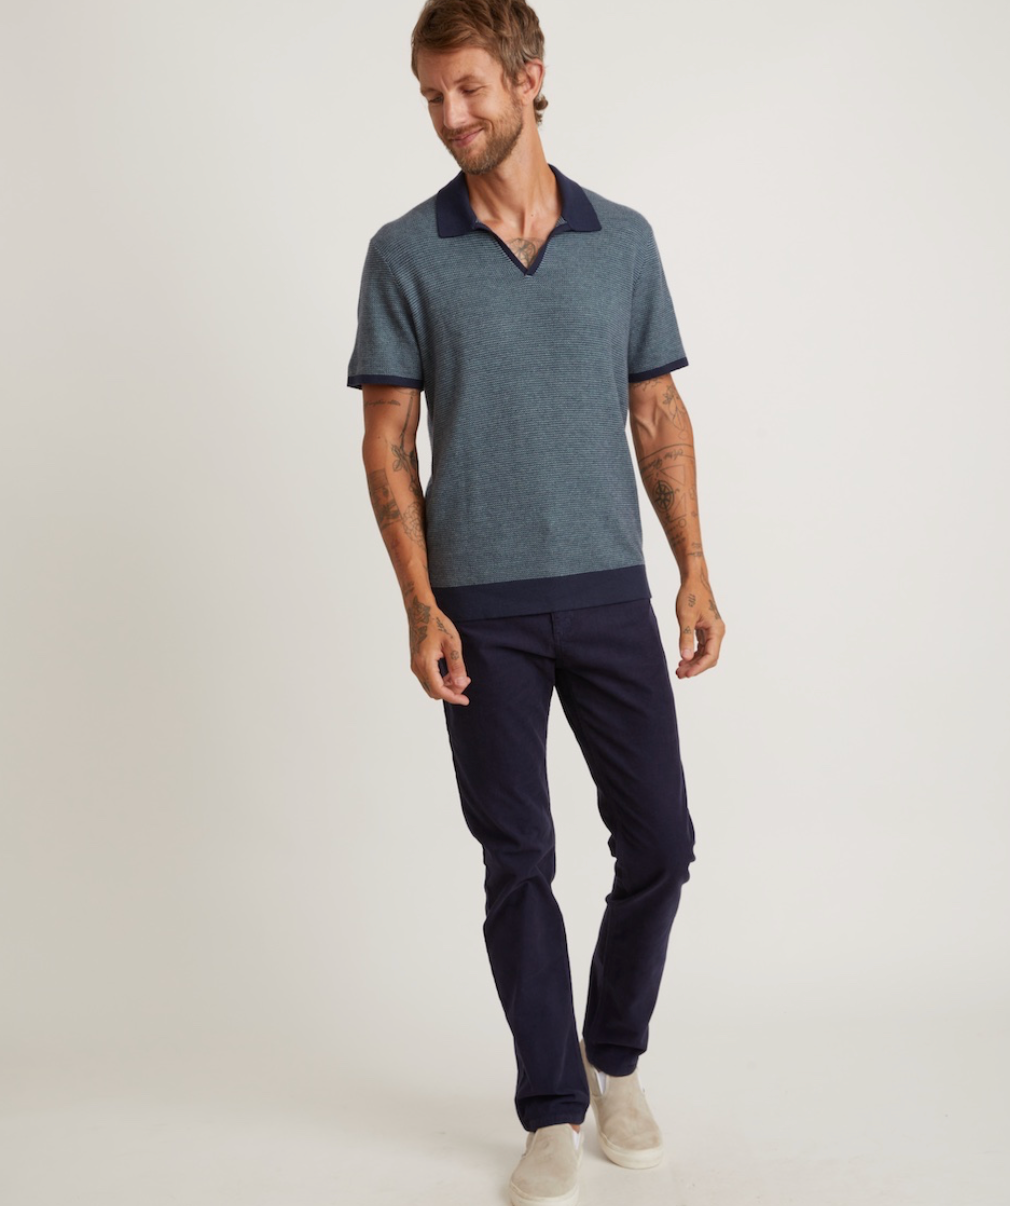 Slim Straight Cambridge Corduroy Pant - Island Outfitters